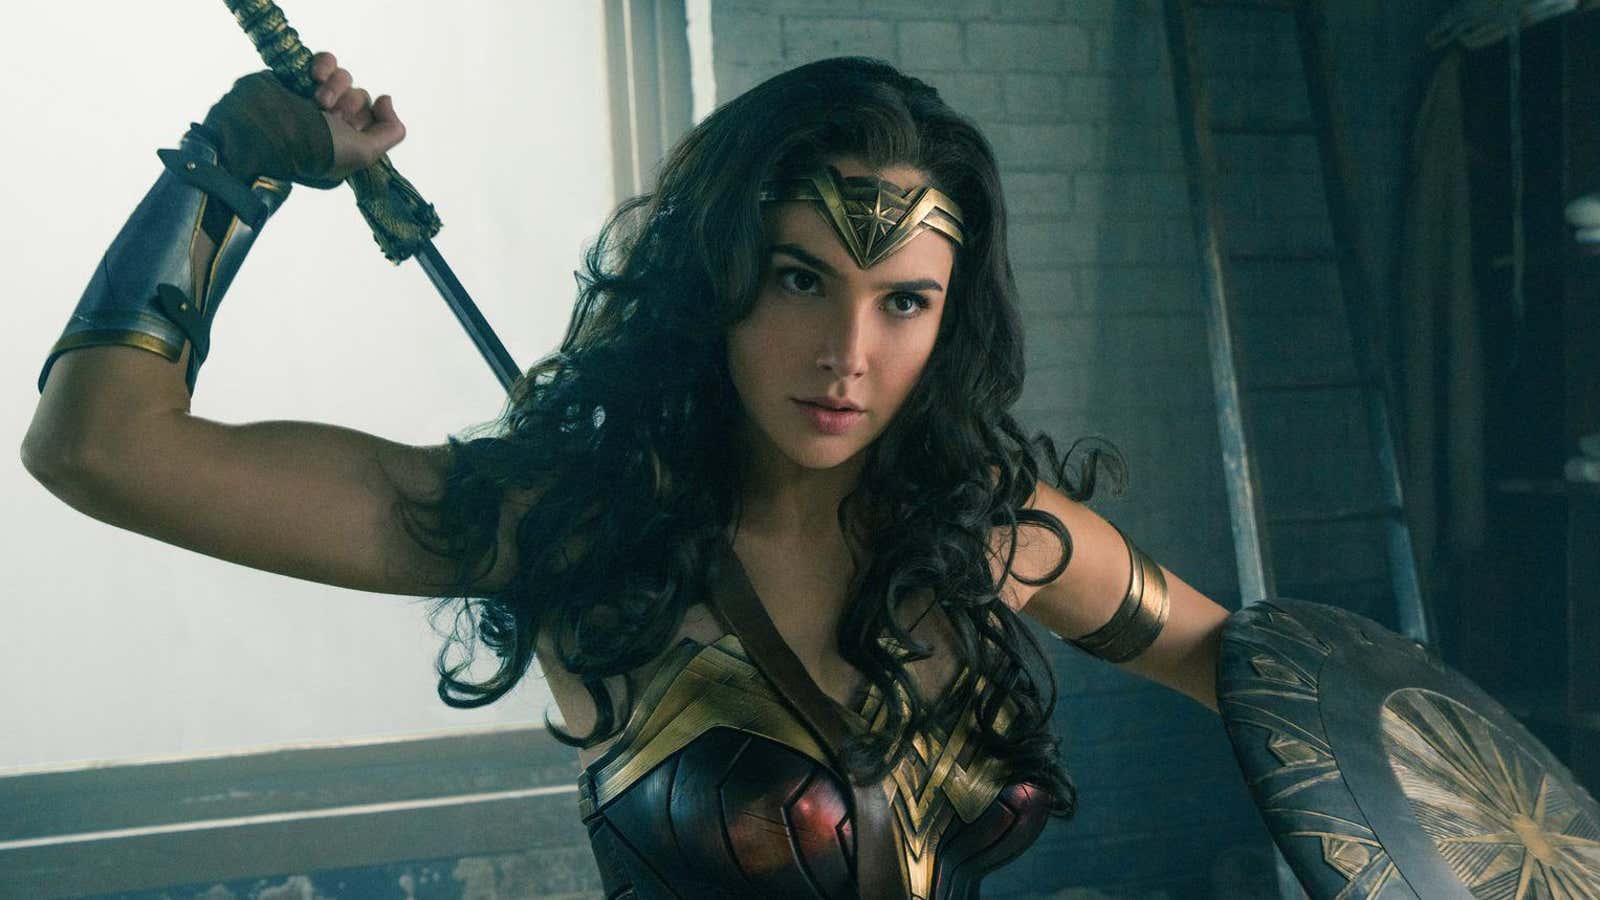 Patty Jenkins directed one of the biggest films of 2017, “Wonder Woman.”